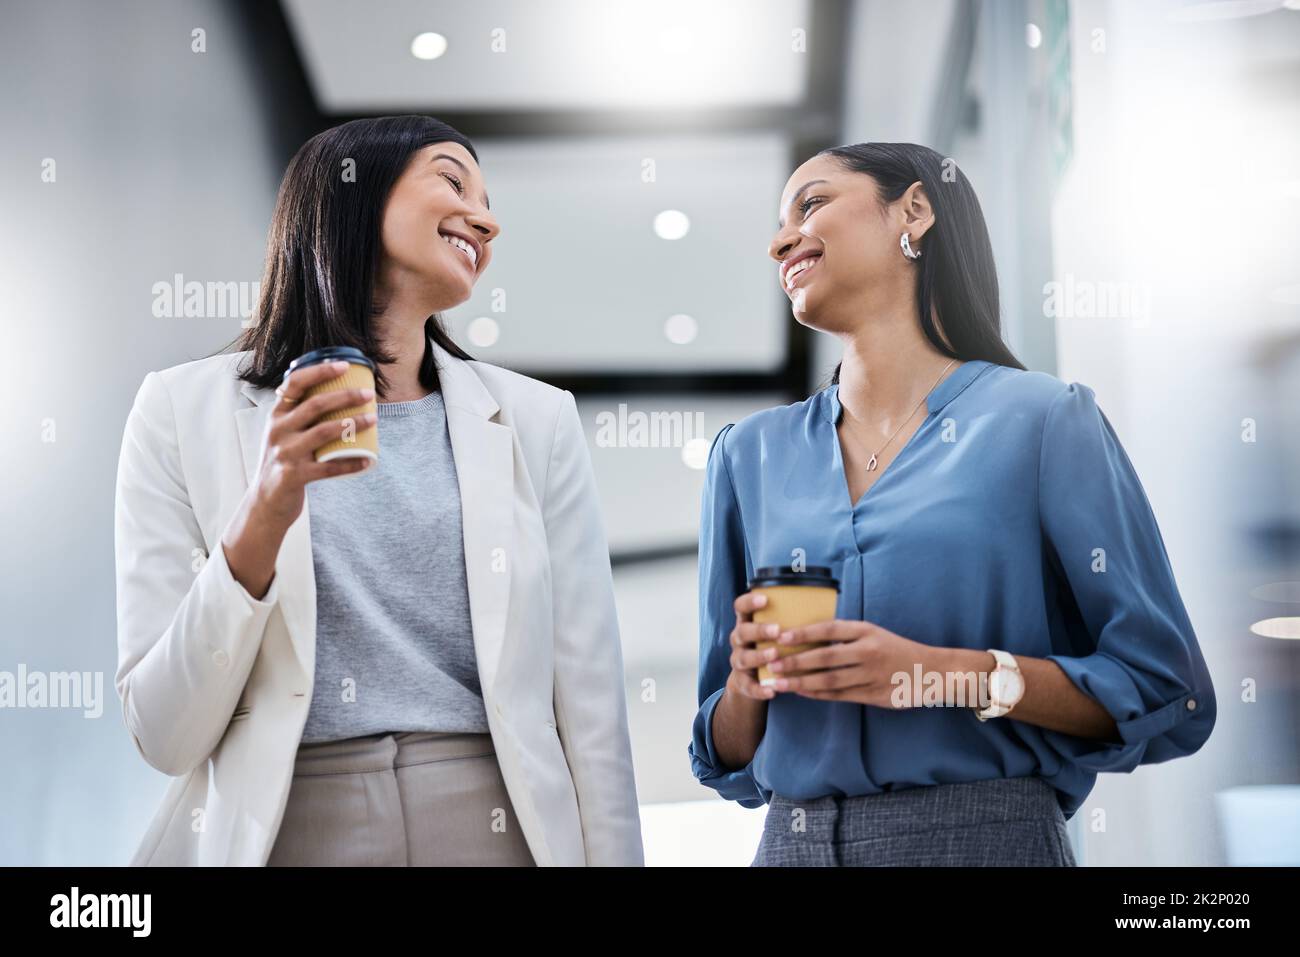 They told us that we couldnt, so we did. Shot of two businesswomen holding coffees while talking in an office. Stock Photo